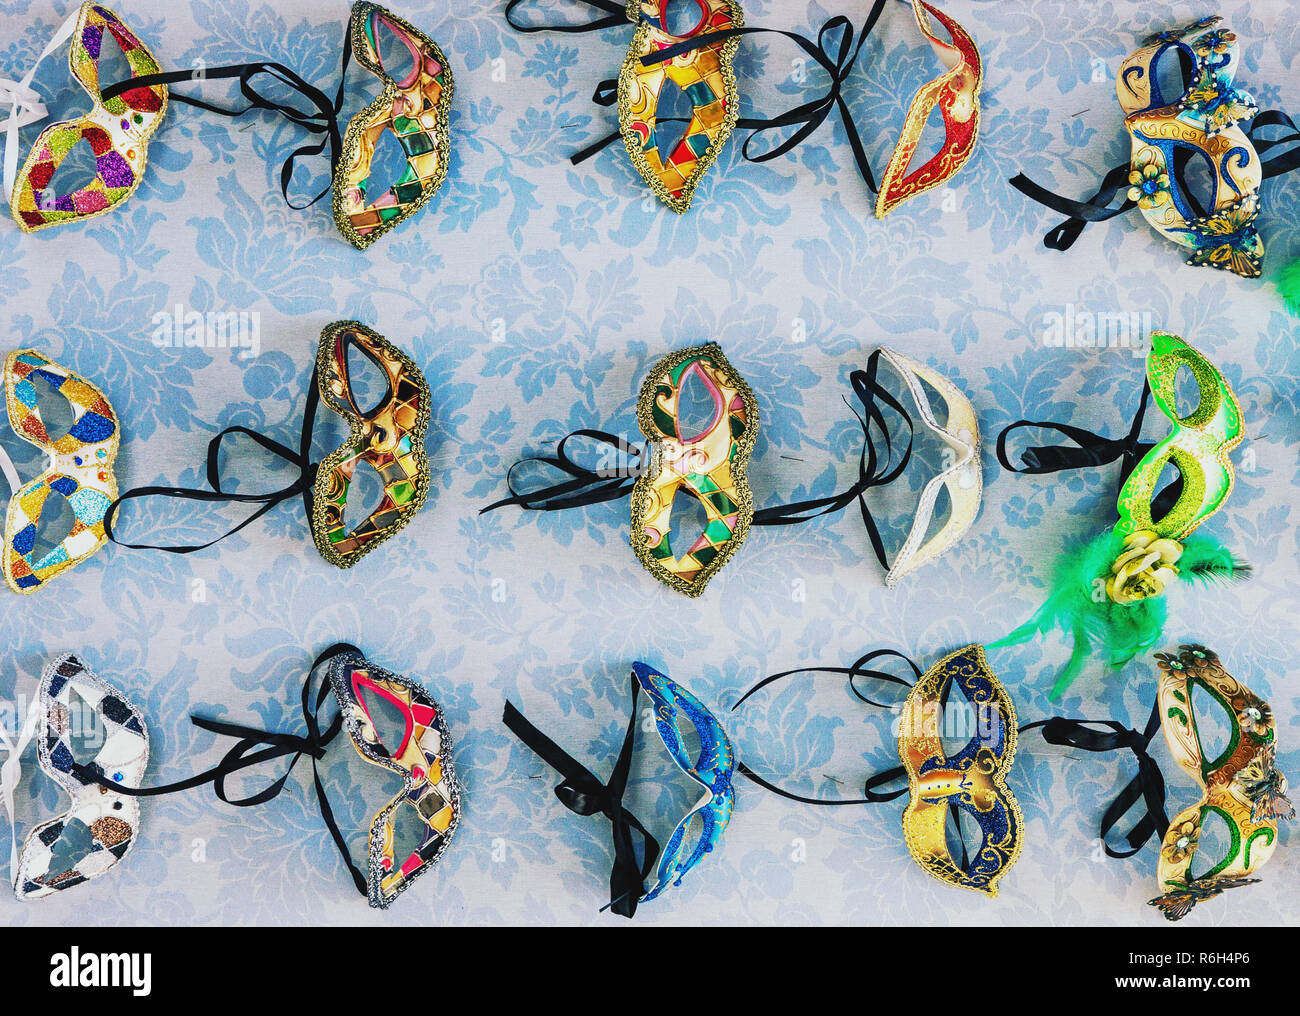 Traditional colorful decorated venetian masks for sale in Venice Stock Photo